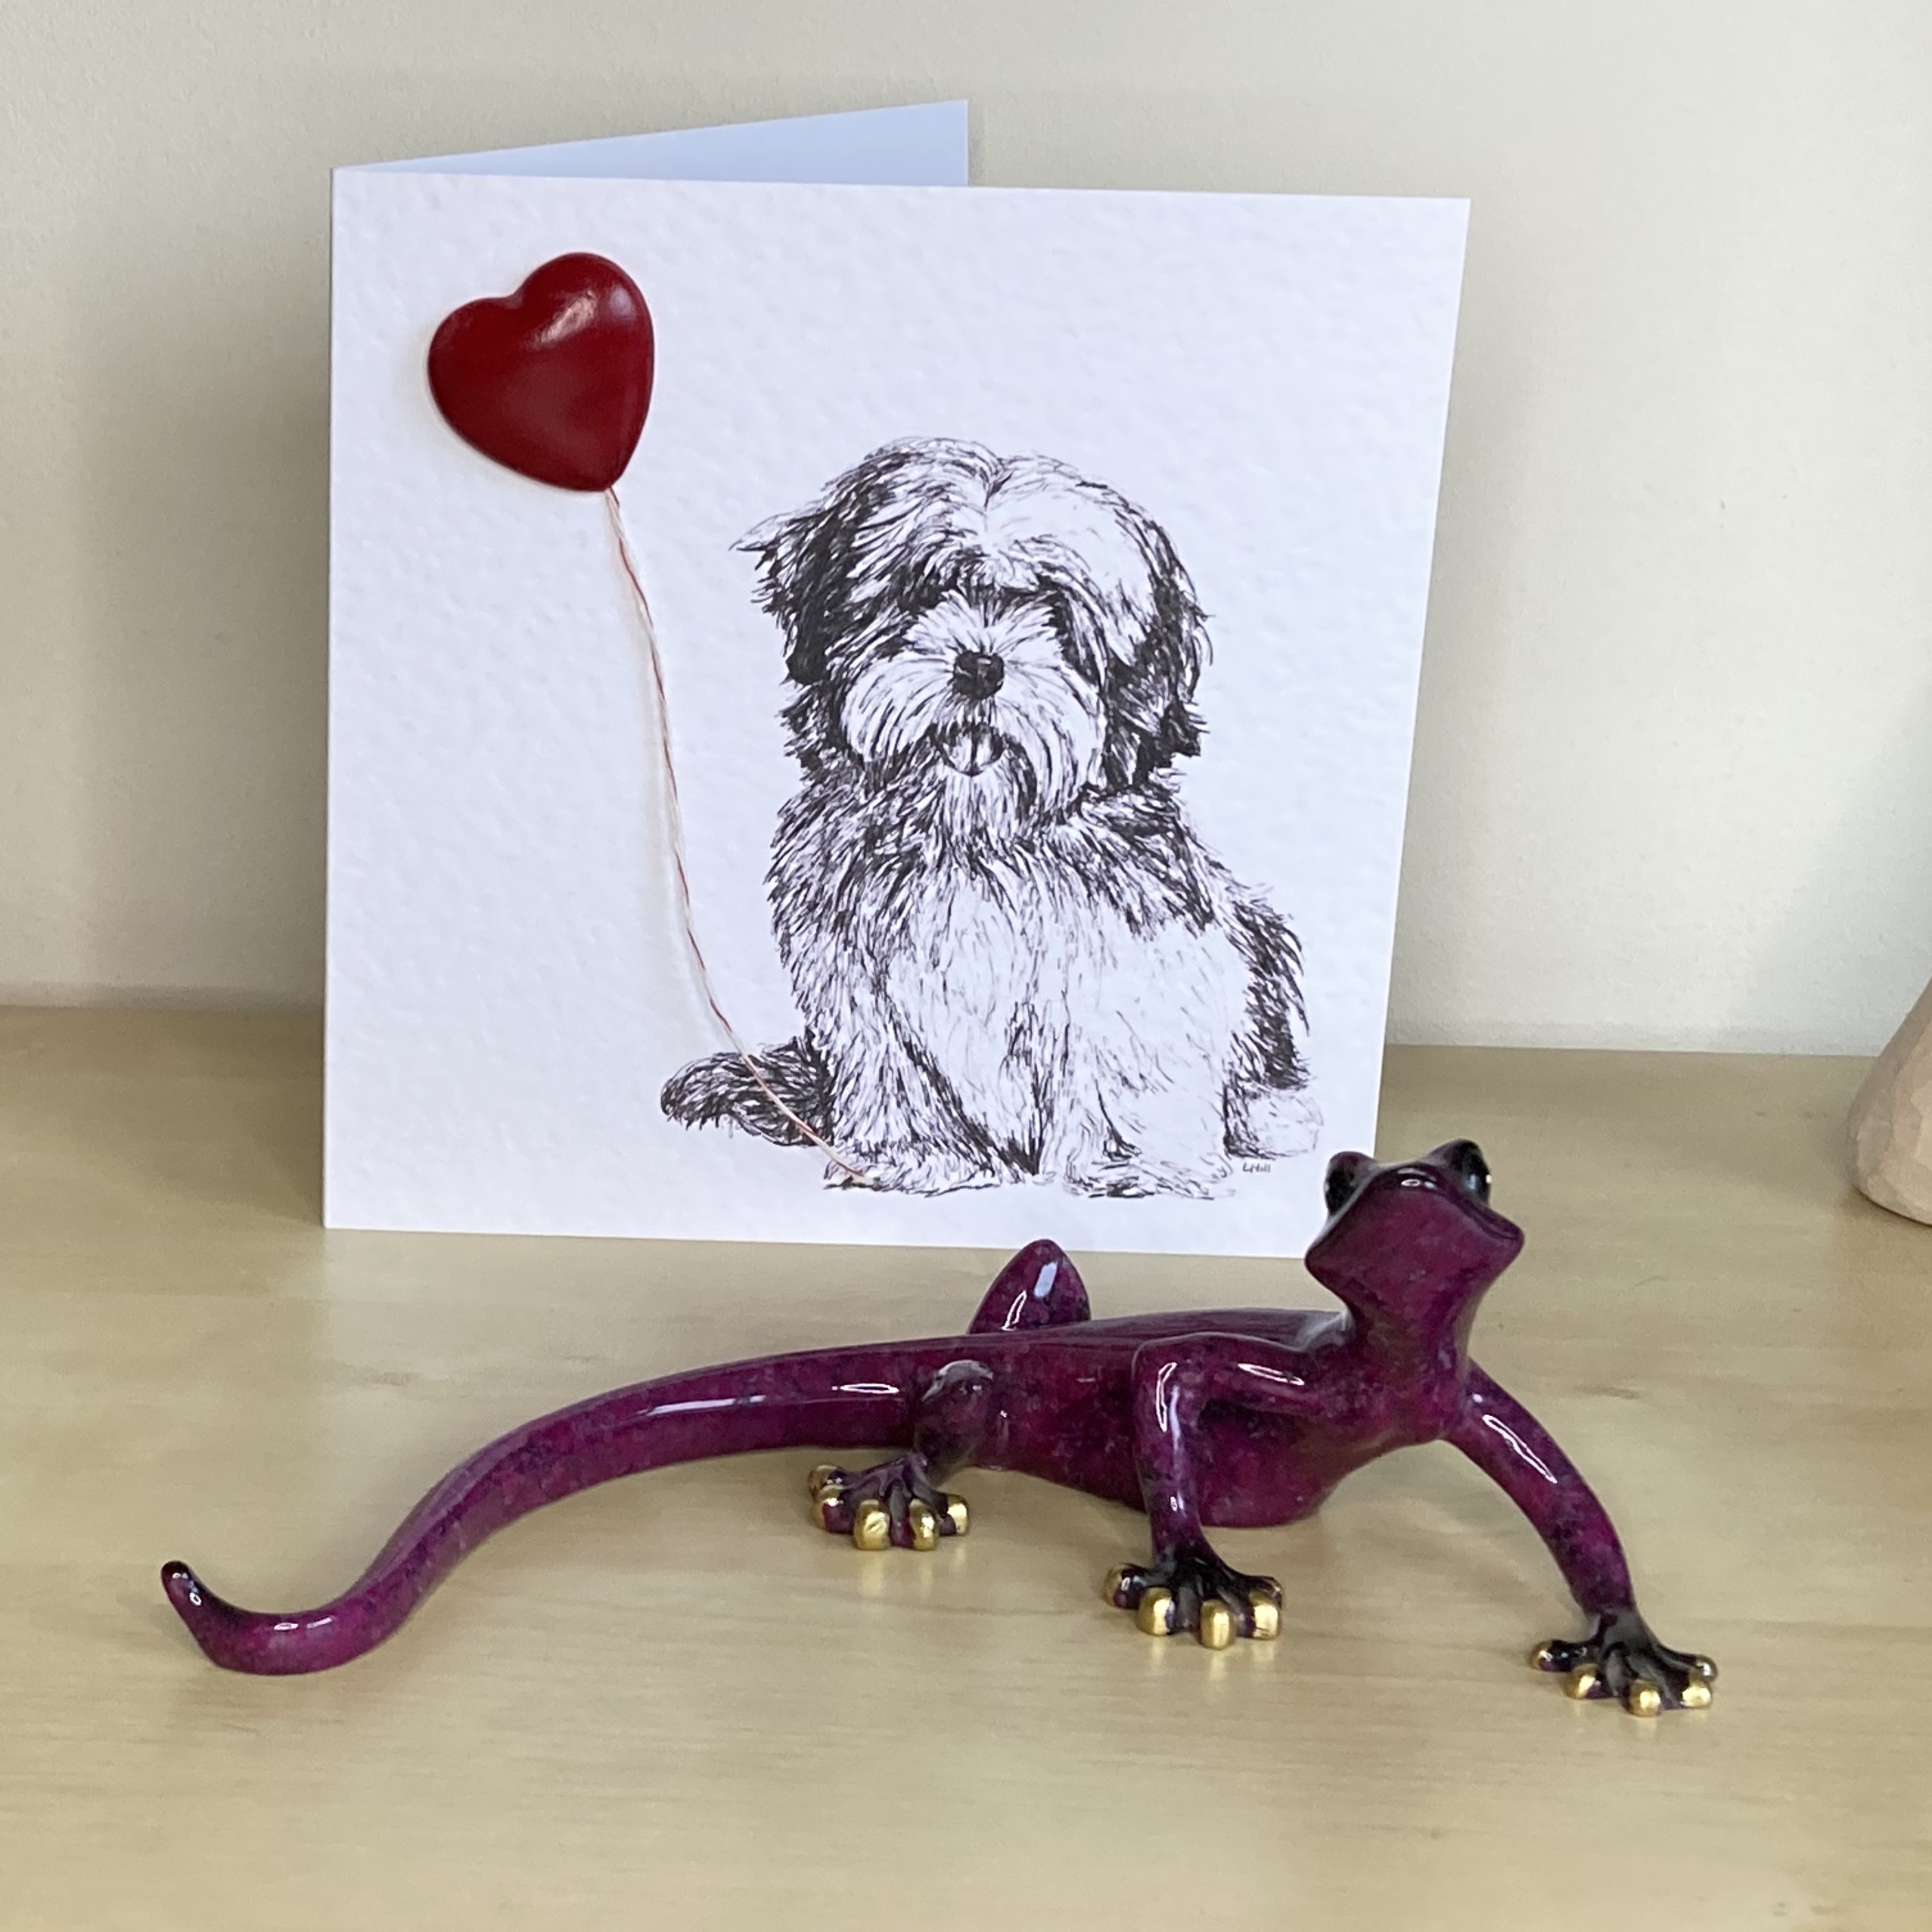 Lhasa Apso 15cm greetings card with 3D red heart balloon